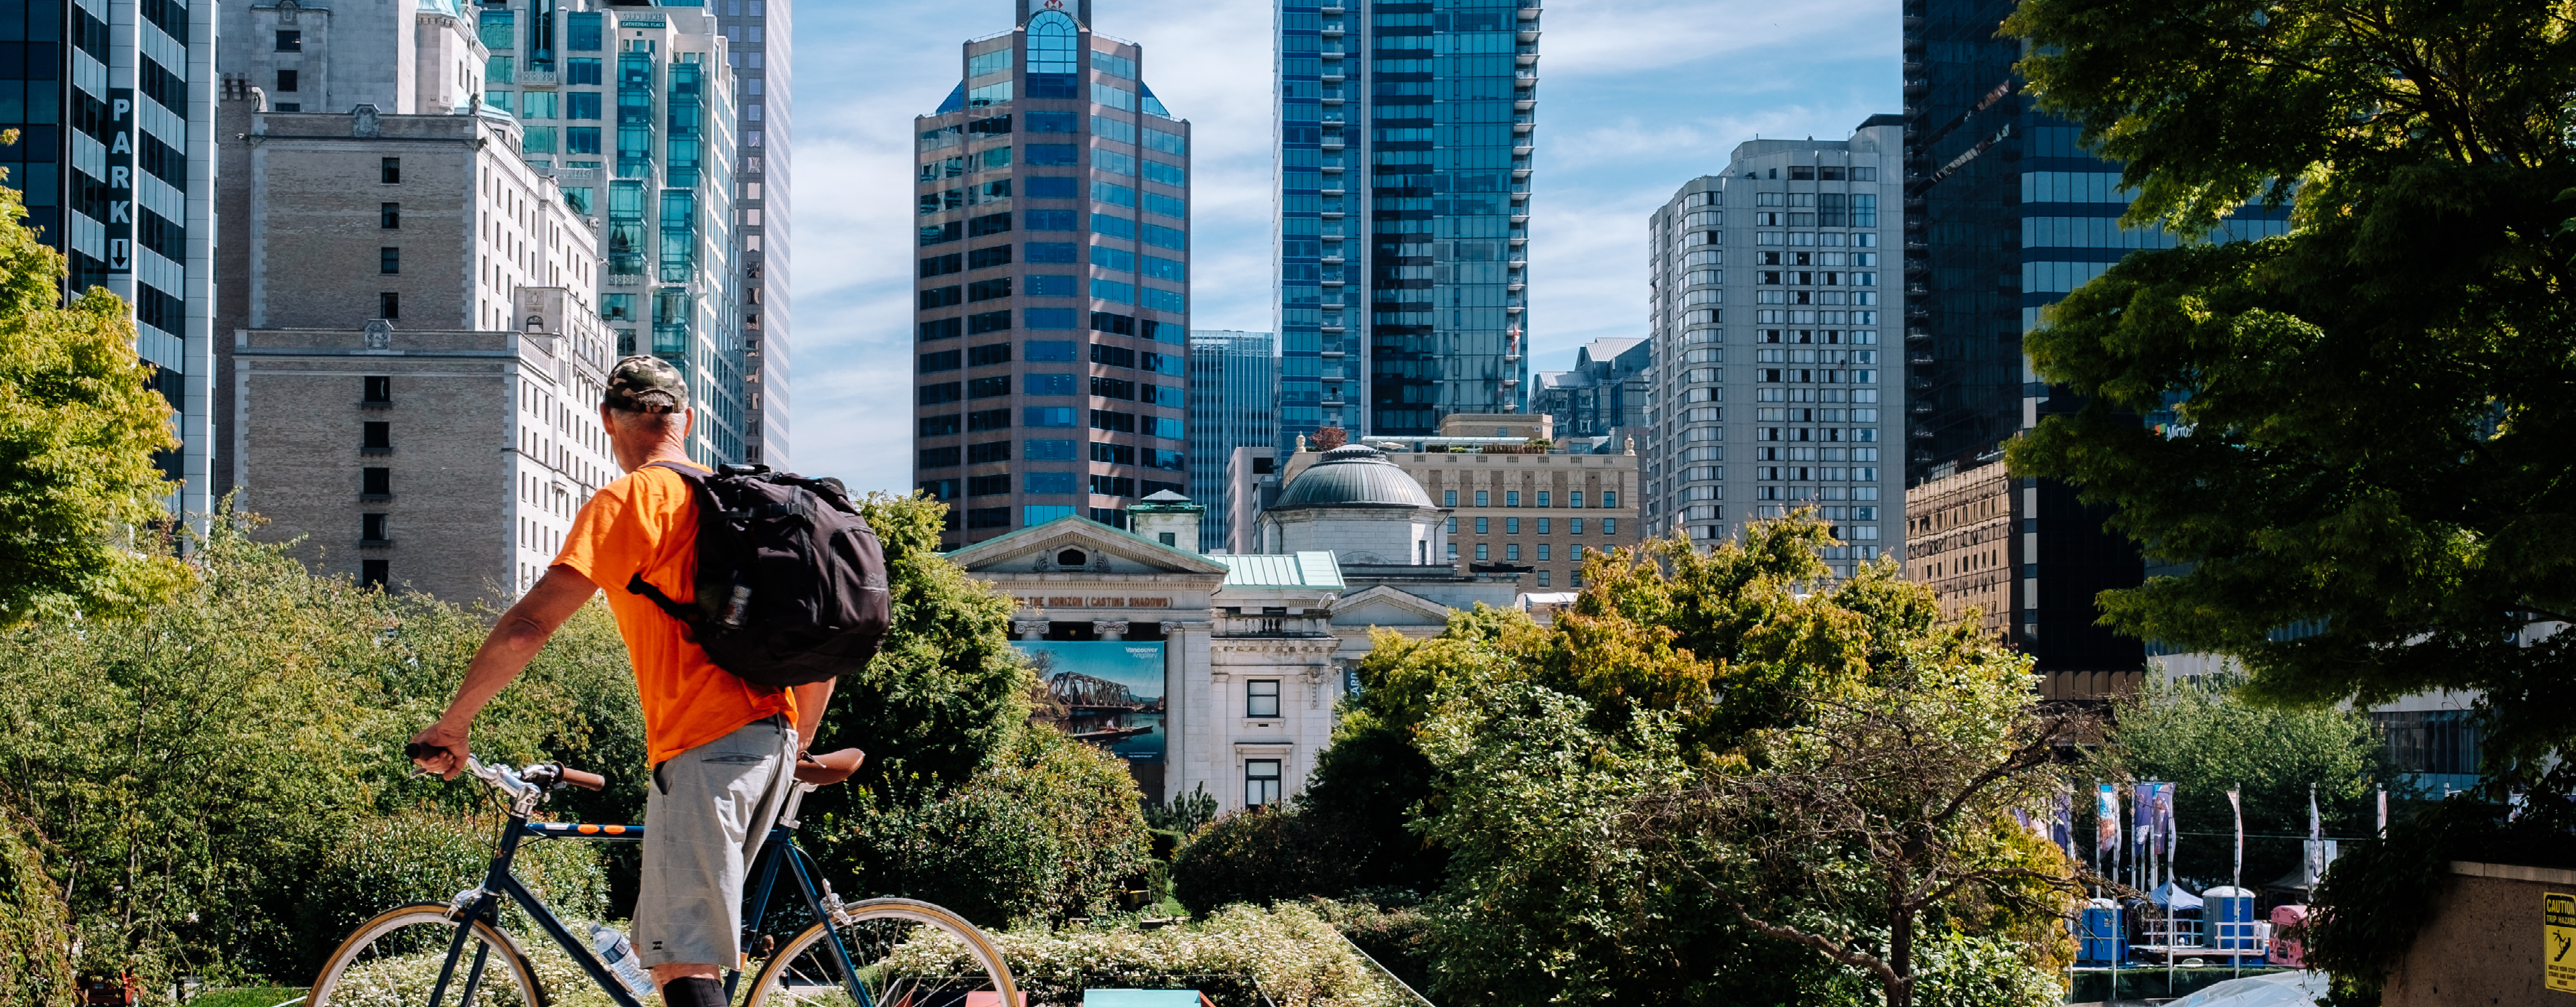 An person cycling stops to look at Vancouver's building landscape.